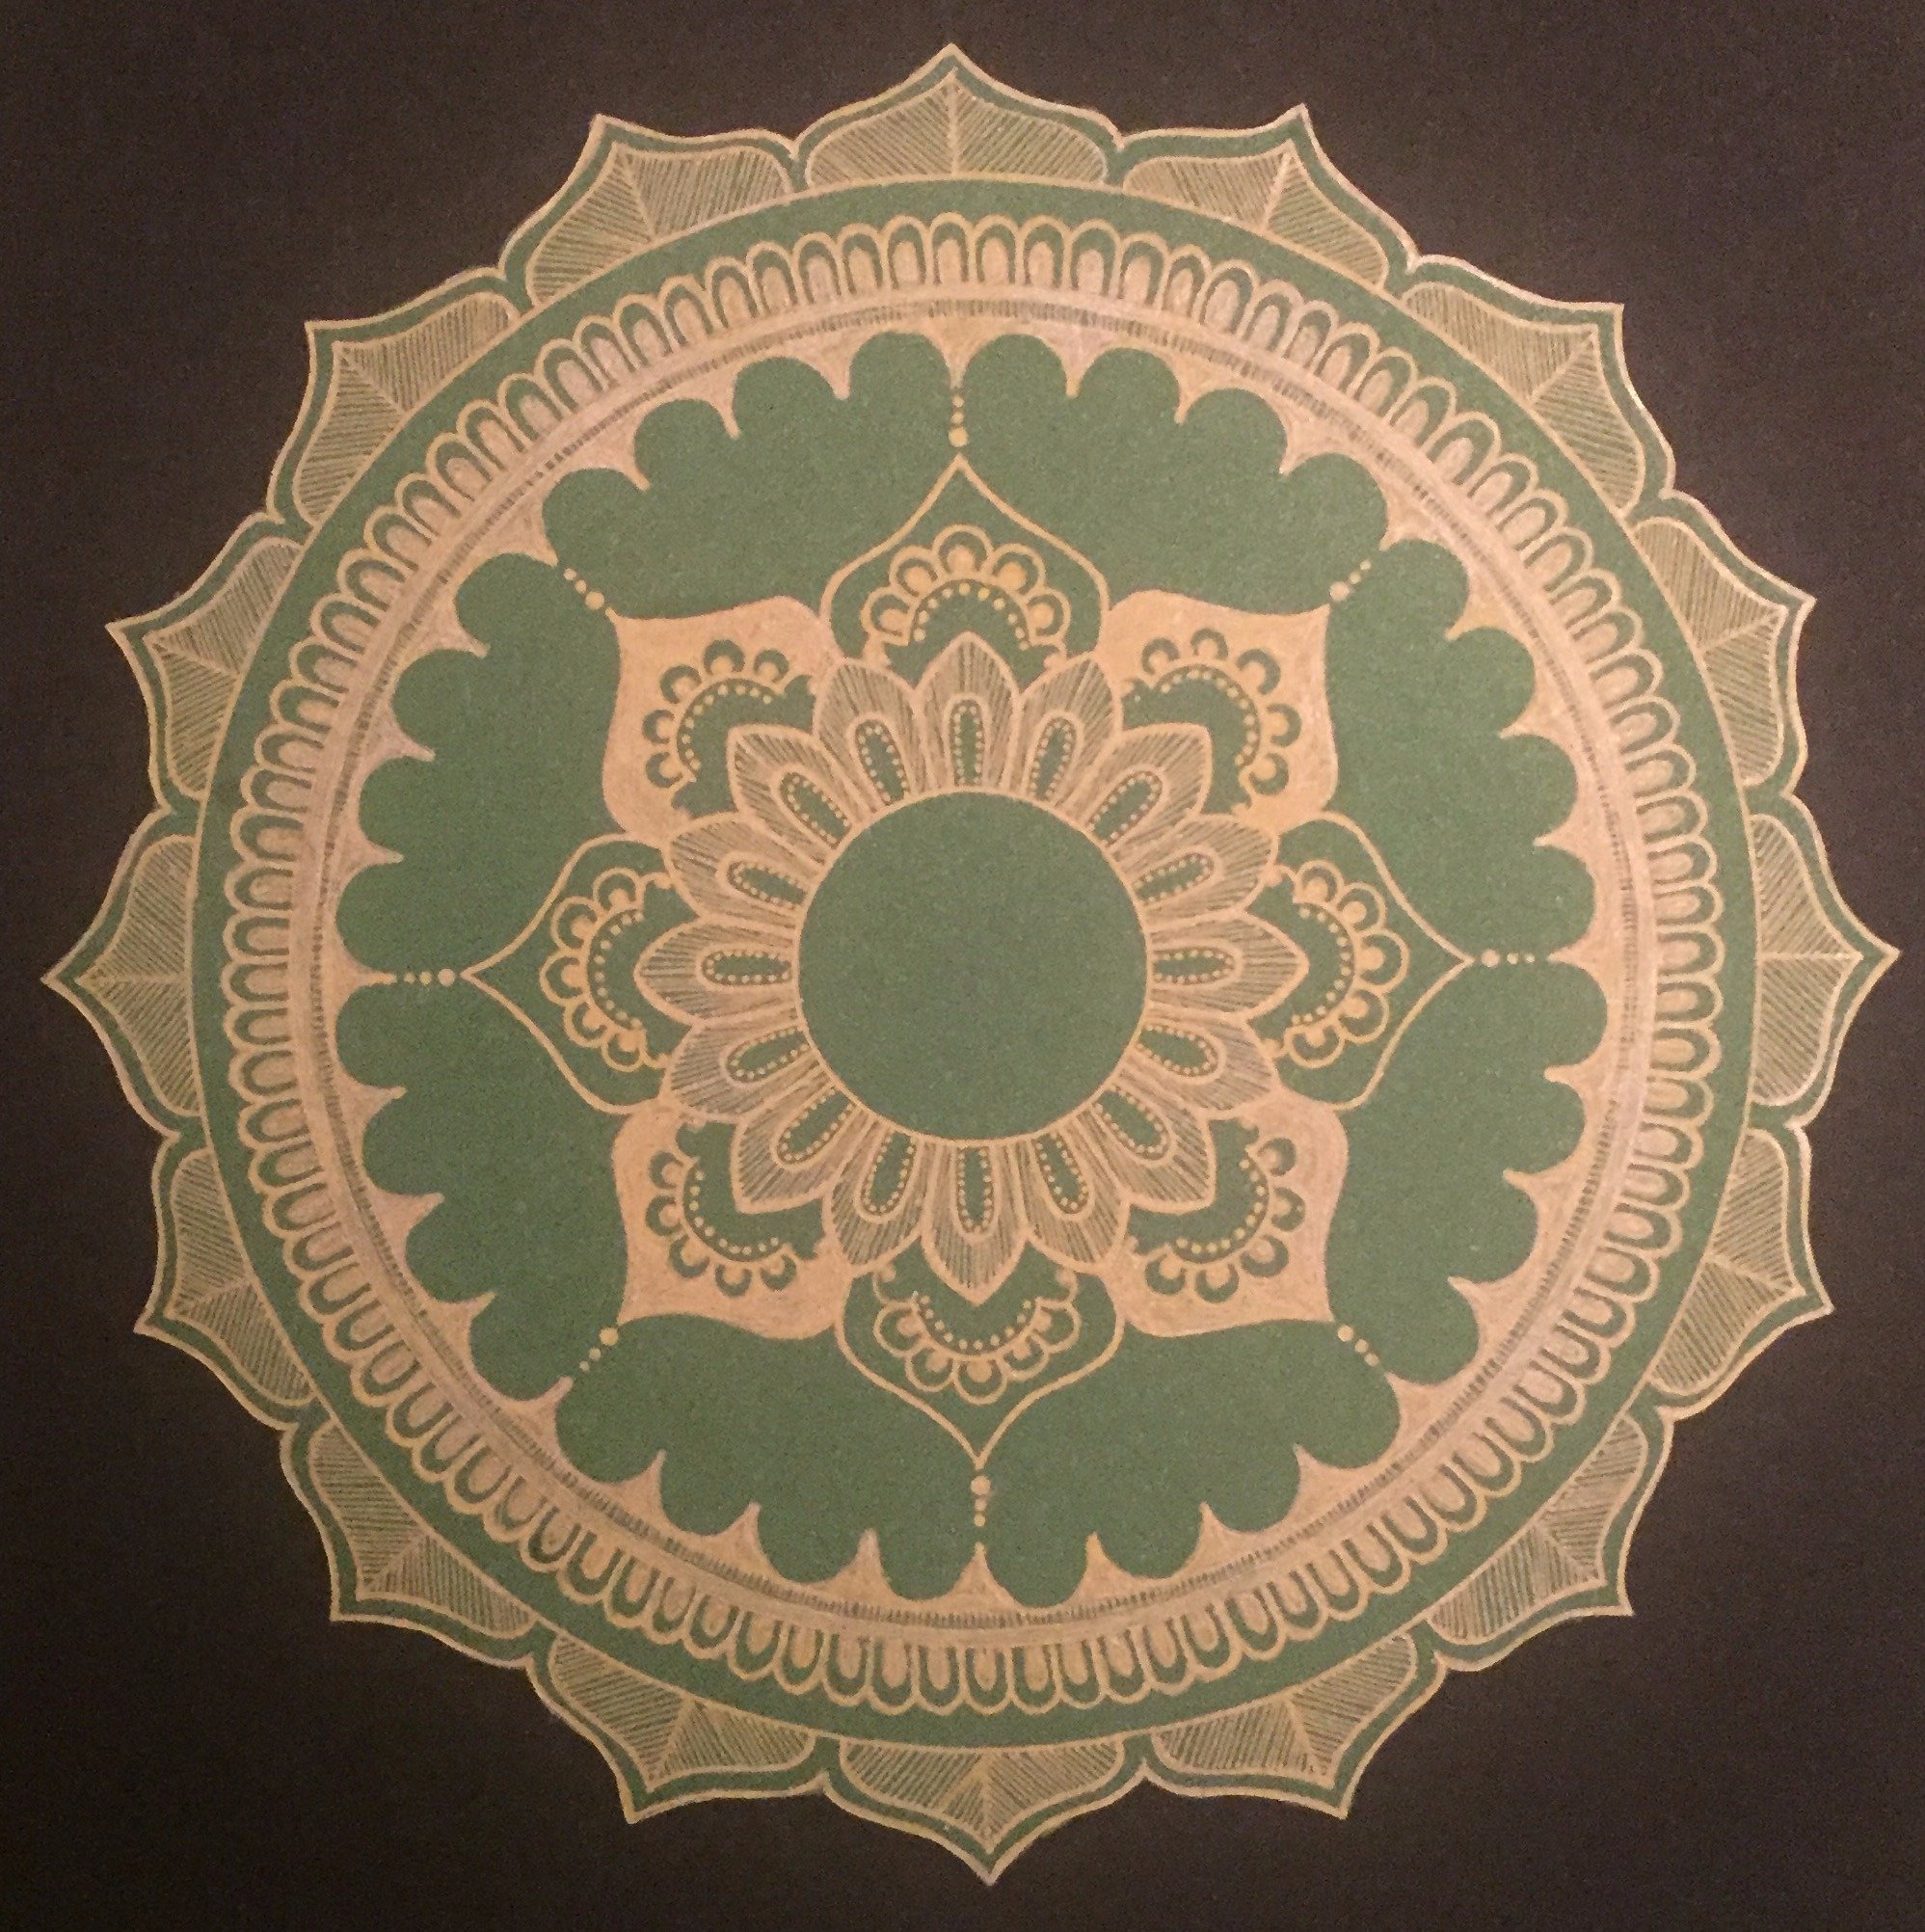 Rabina Byanjankar Shakya; Golden Lotus, 2017, Original Painting Other, 210 x 297 mm. Artwork description: 241 Golden lotus cut out Mandala. Hand drawn using gold color gel pen on green metallic sheet cutout and pasted on black A4 size paper. Color green is associated with health, prosperity, and harmony. Gold represents wealth, success and status. ...